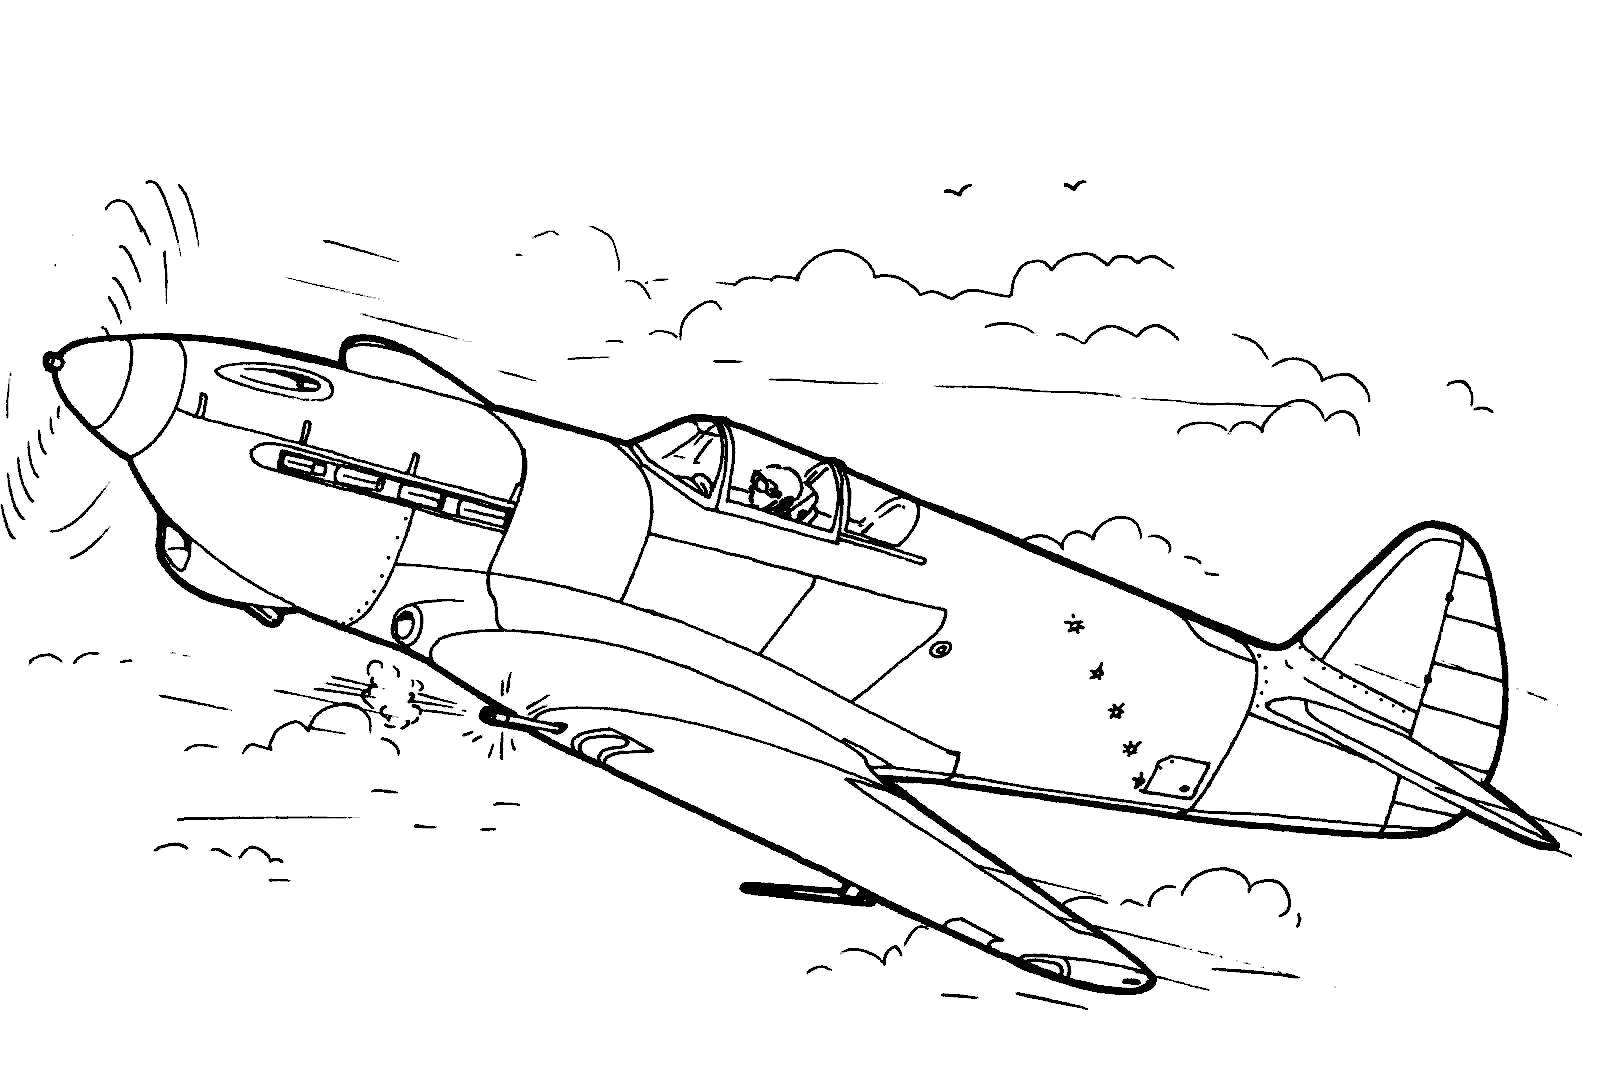 Coloring The plane. Category the planes. Tags:  Plane.